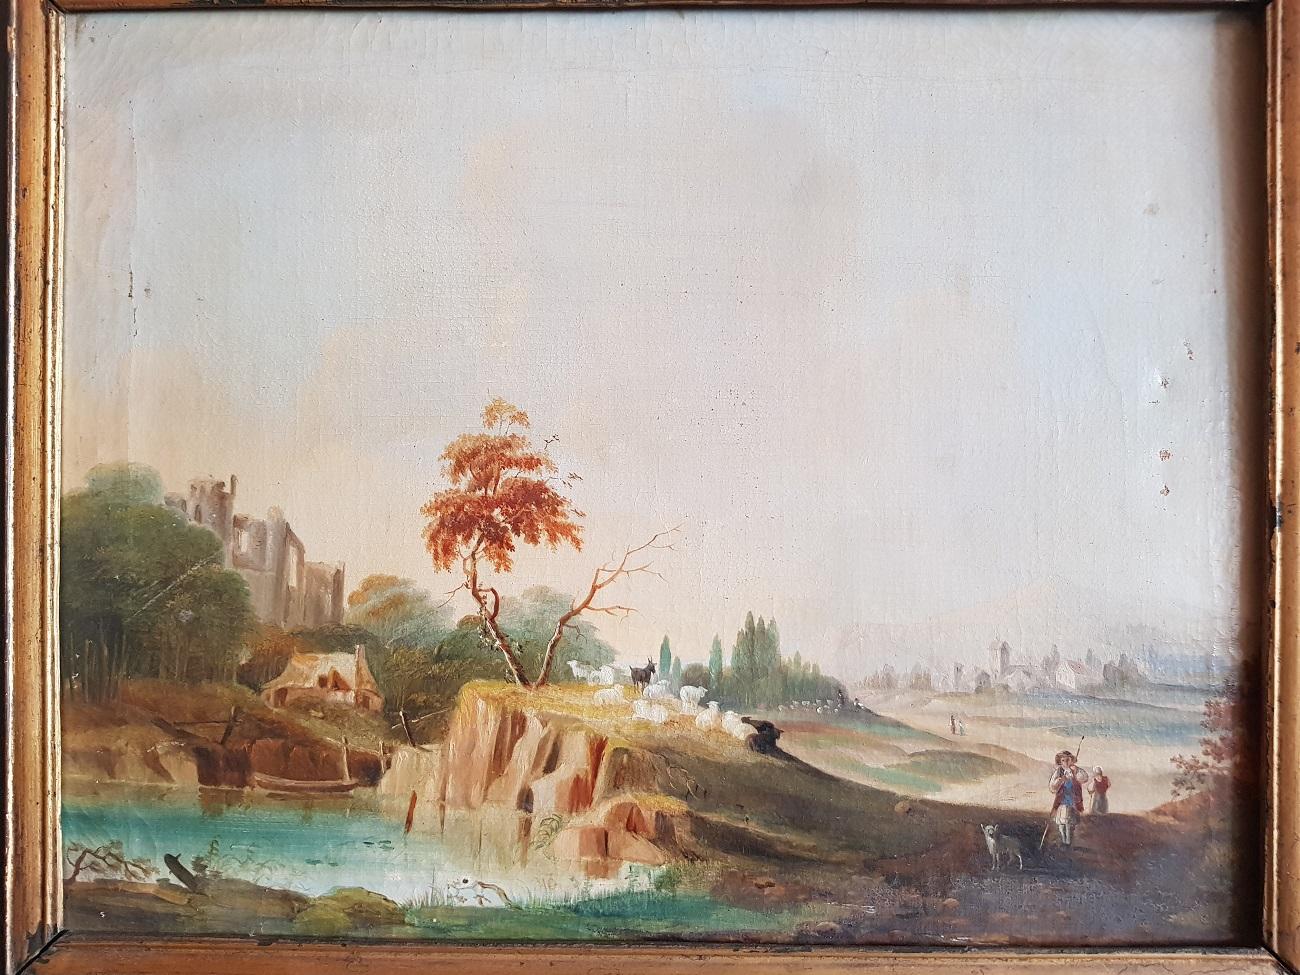 19th century German oil painting an panel by unknown artist, depicting a landscape with ruin, sheep shepherd and village in the background, has a slight loss of paint and crackle.

The measurements are incl. Frame,
Depth 4.5 cm/ 1.7 inch.
Width